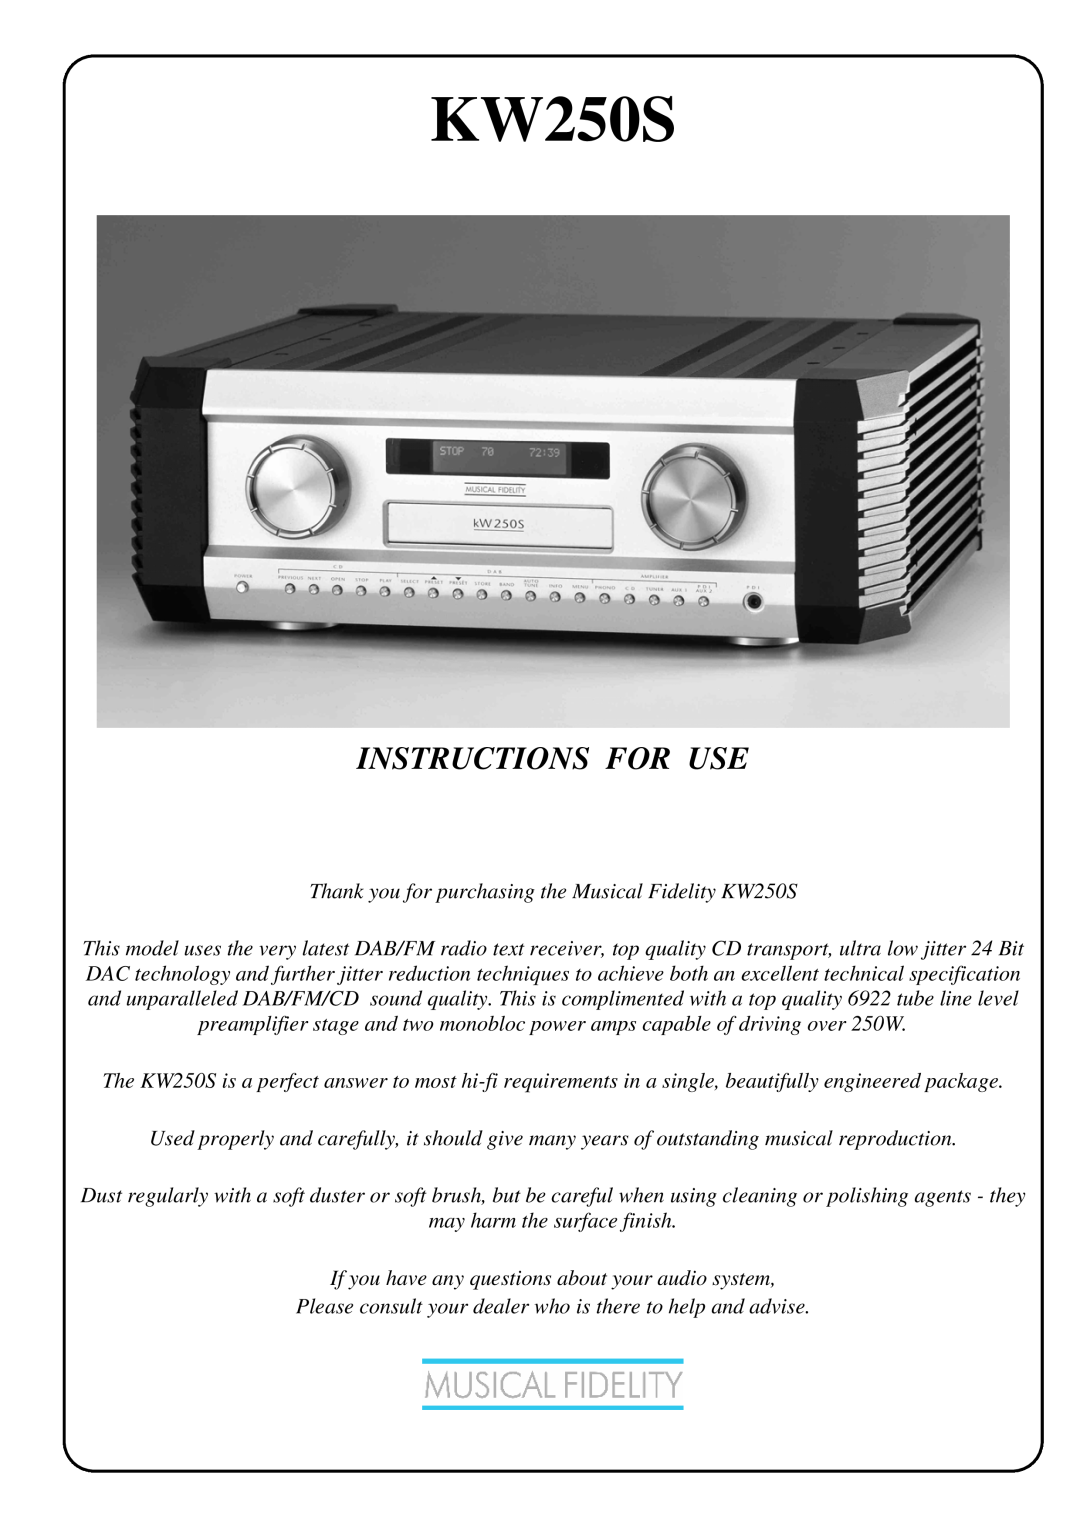 Musical Fidelity KW250S manual Instructions For Use 